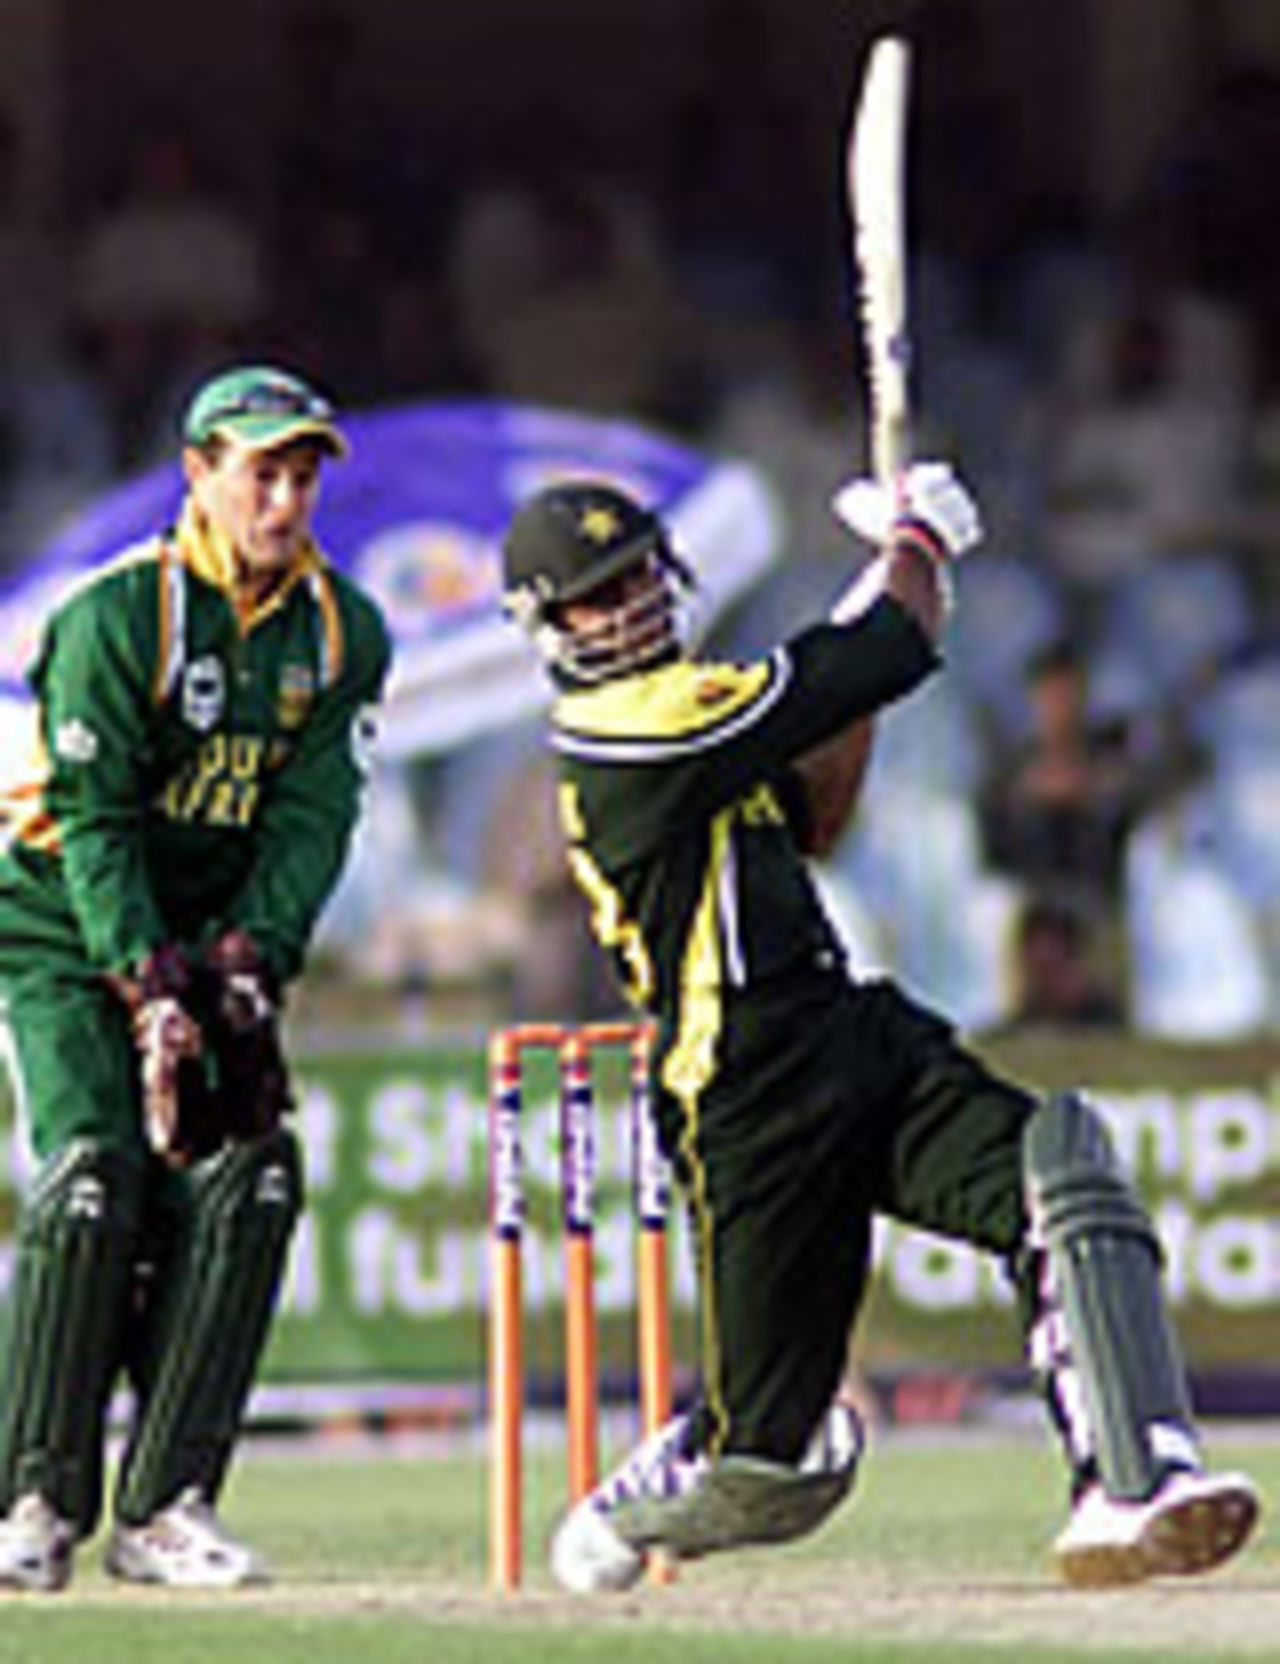 Shoaib Malik hits one out of his 6 sixes, Lahore, Ist ODI, Pakistan v South Africa, 3 October 2003